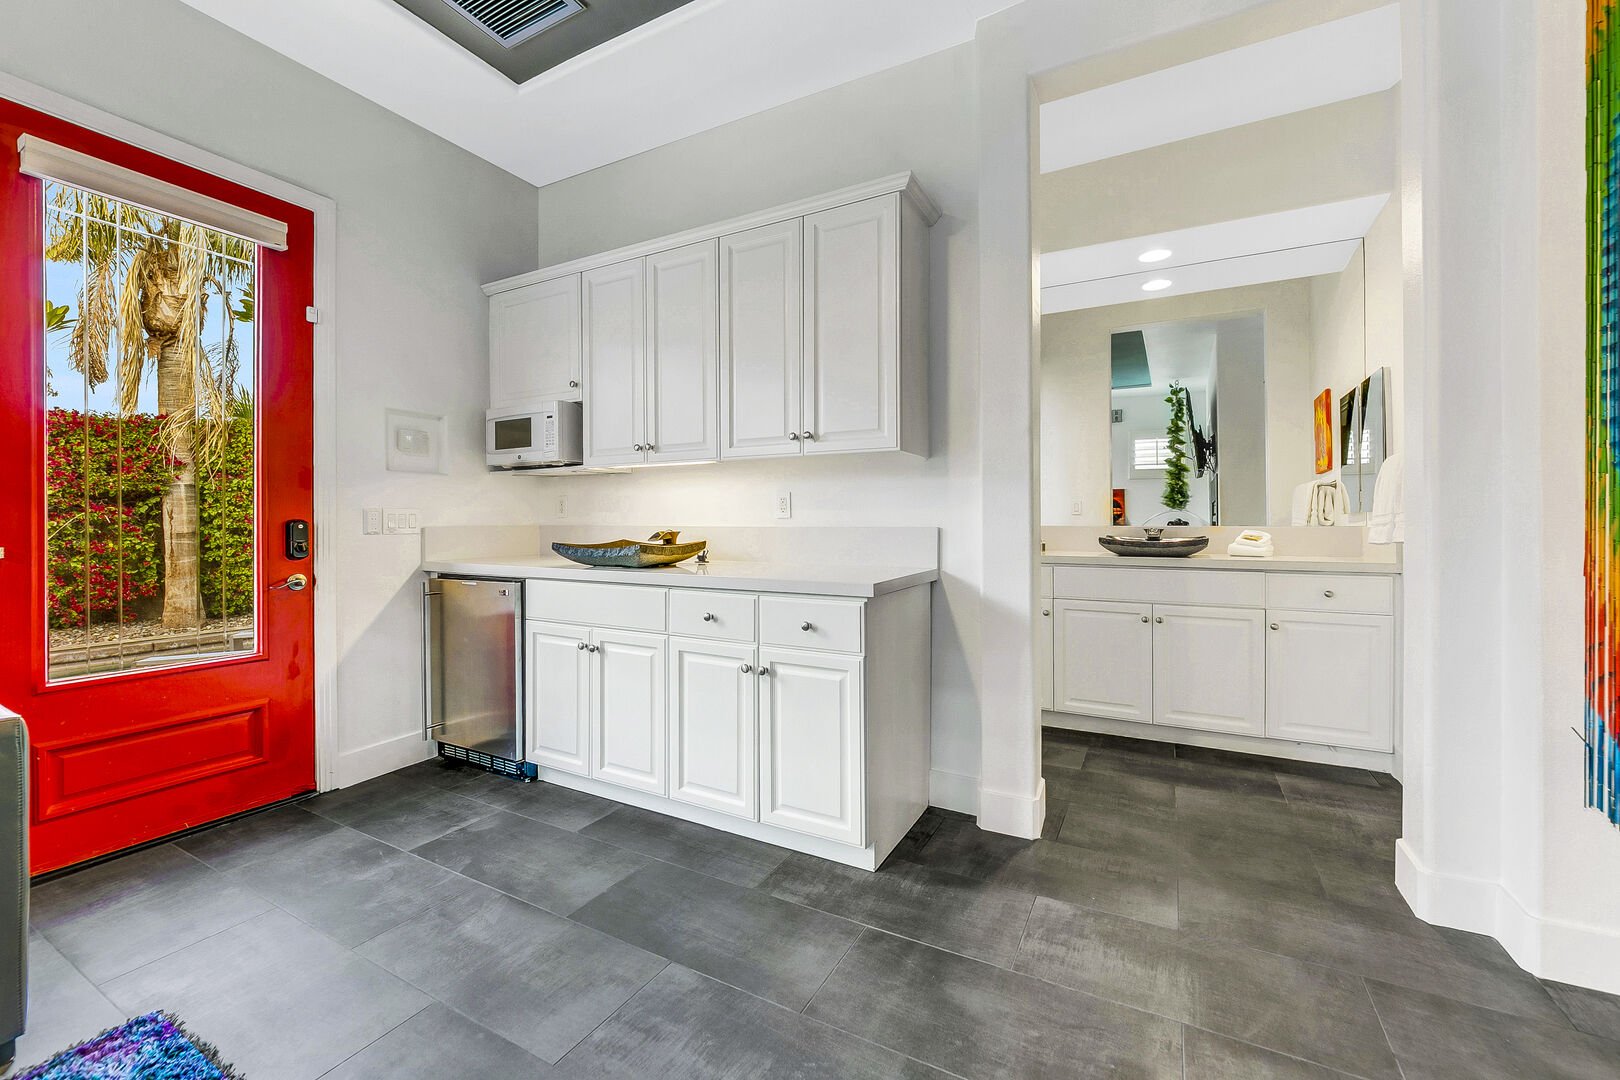 The casita kitchen area has an under-counter refrigerator including a high-capacity ice maker, microwave oven, sink and beautiful granite counter top.